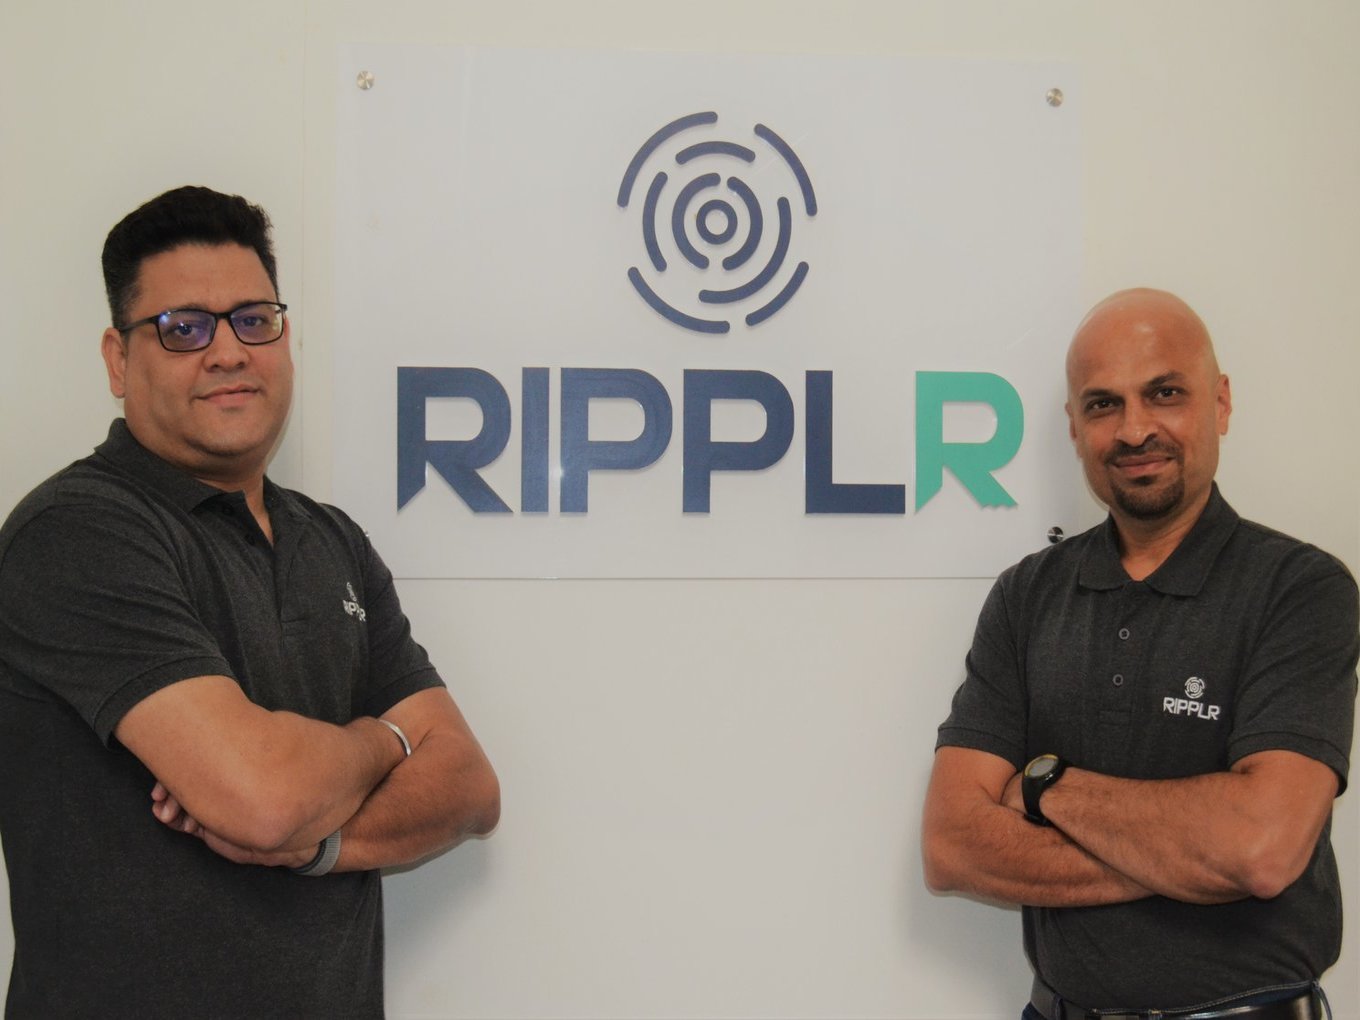 Ripplr Bags Seed Funding To Strengthen Tech Stack And Infrastructure